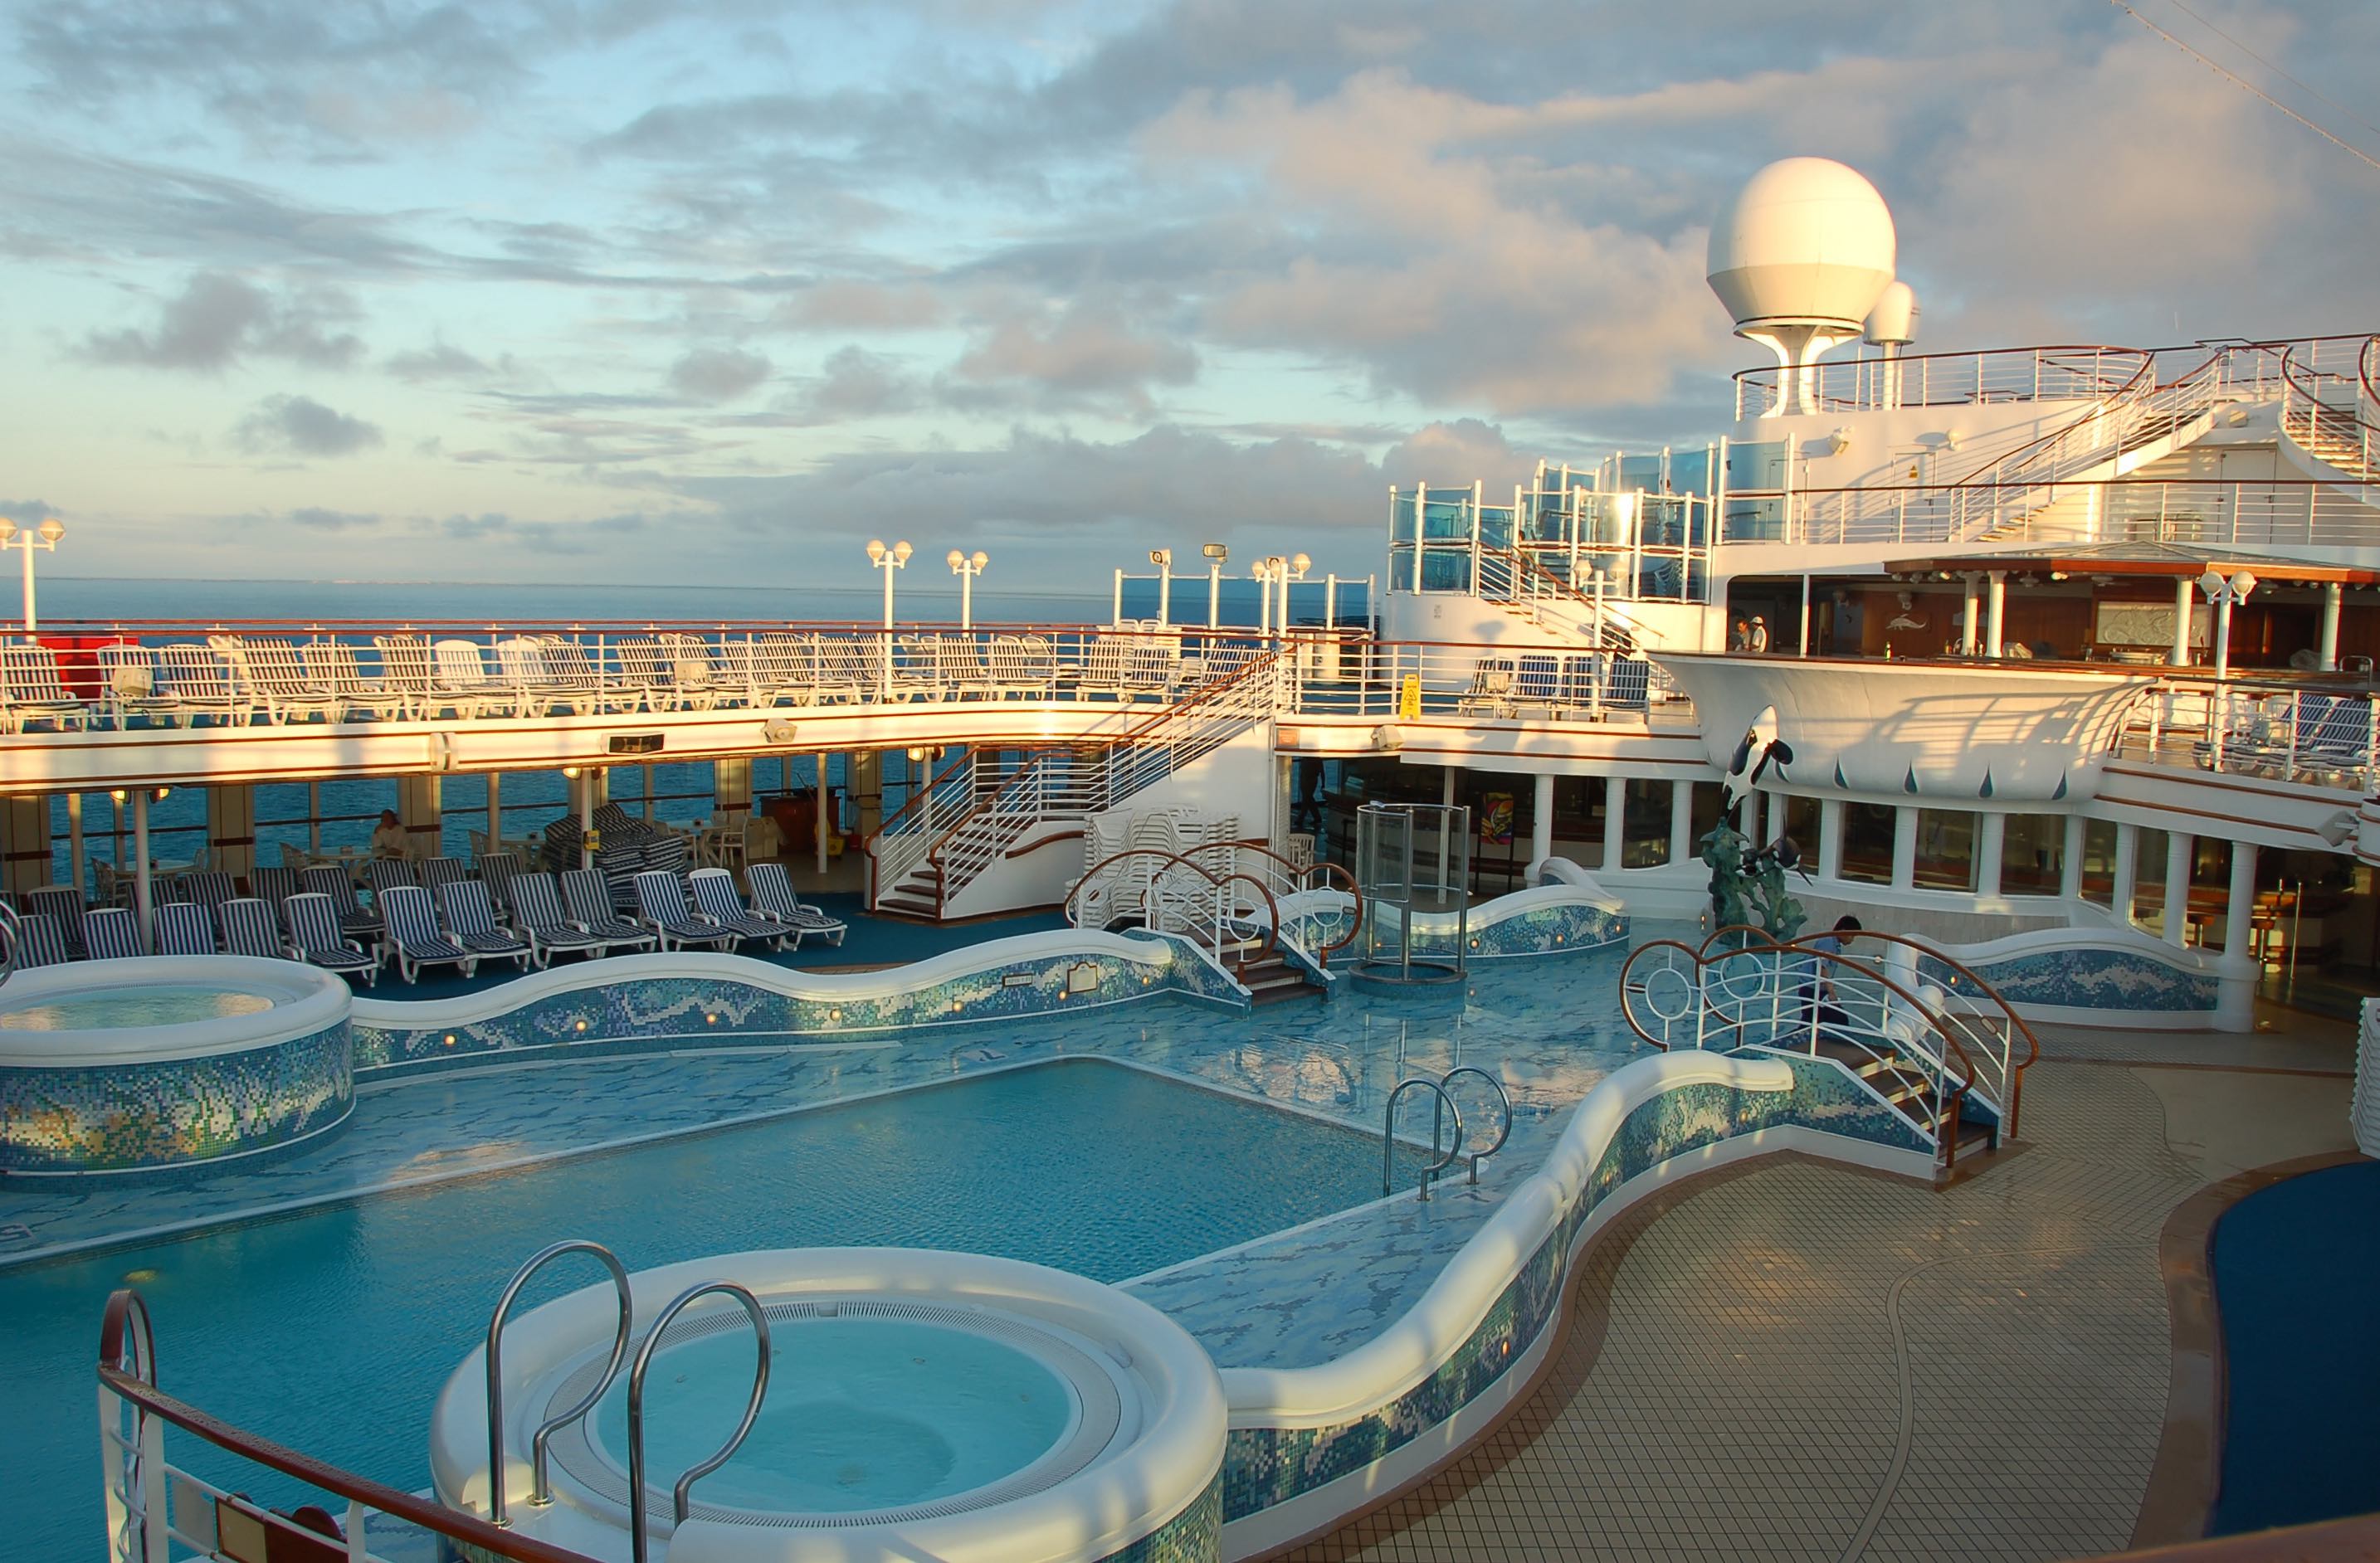 View pools and spa facilities on top deck of a cruise ship.